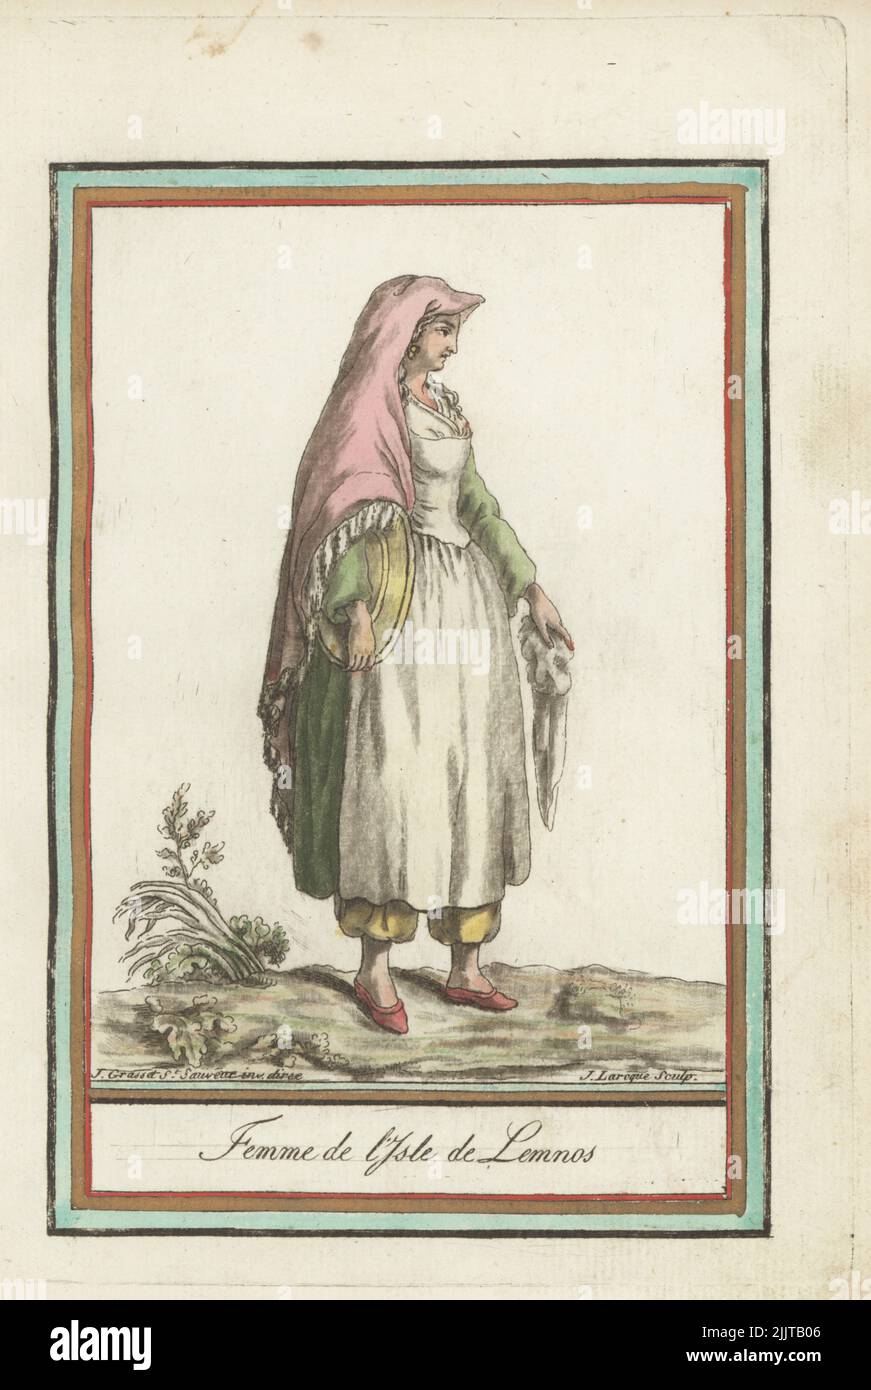 Woman of the island of Lemnos under the Ottoman Empire, She wears a veil, bodice, skirts, apron, harem pants, slippers. Mythical land of Hephaestus or Vulcan, gods of the forge. Femme de l'isle de Lemnos. Handcoloured copperplate engraving by J. Laroque after a design by Jacques Grasset de Saint-Sauveur from his Encyclopedie des voyages, Encyclopedia of Voyages, Bordeaux, France, 1792. Stock Photo